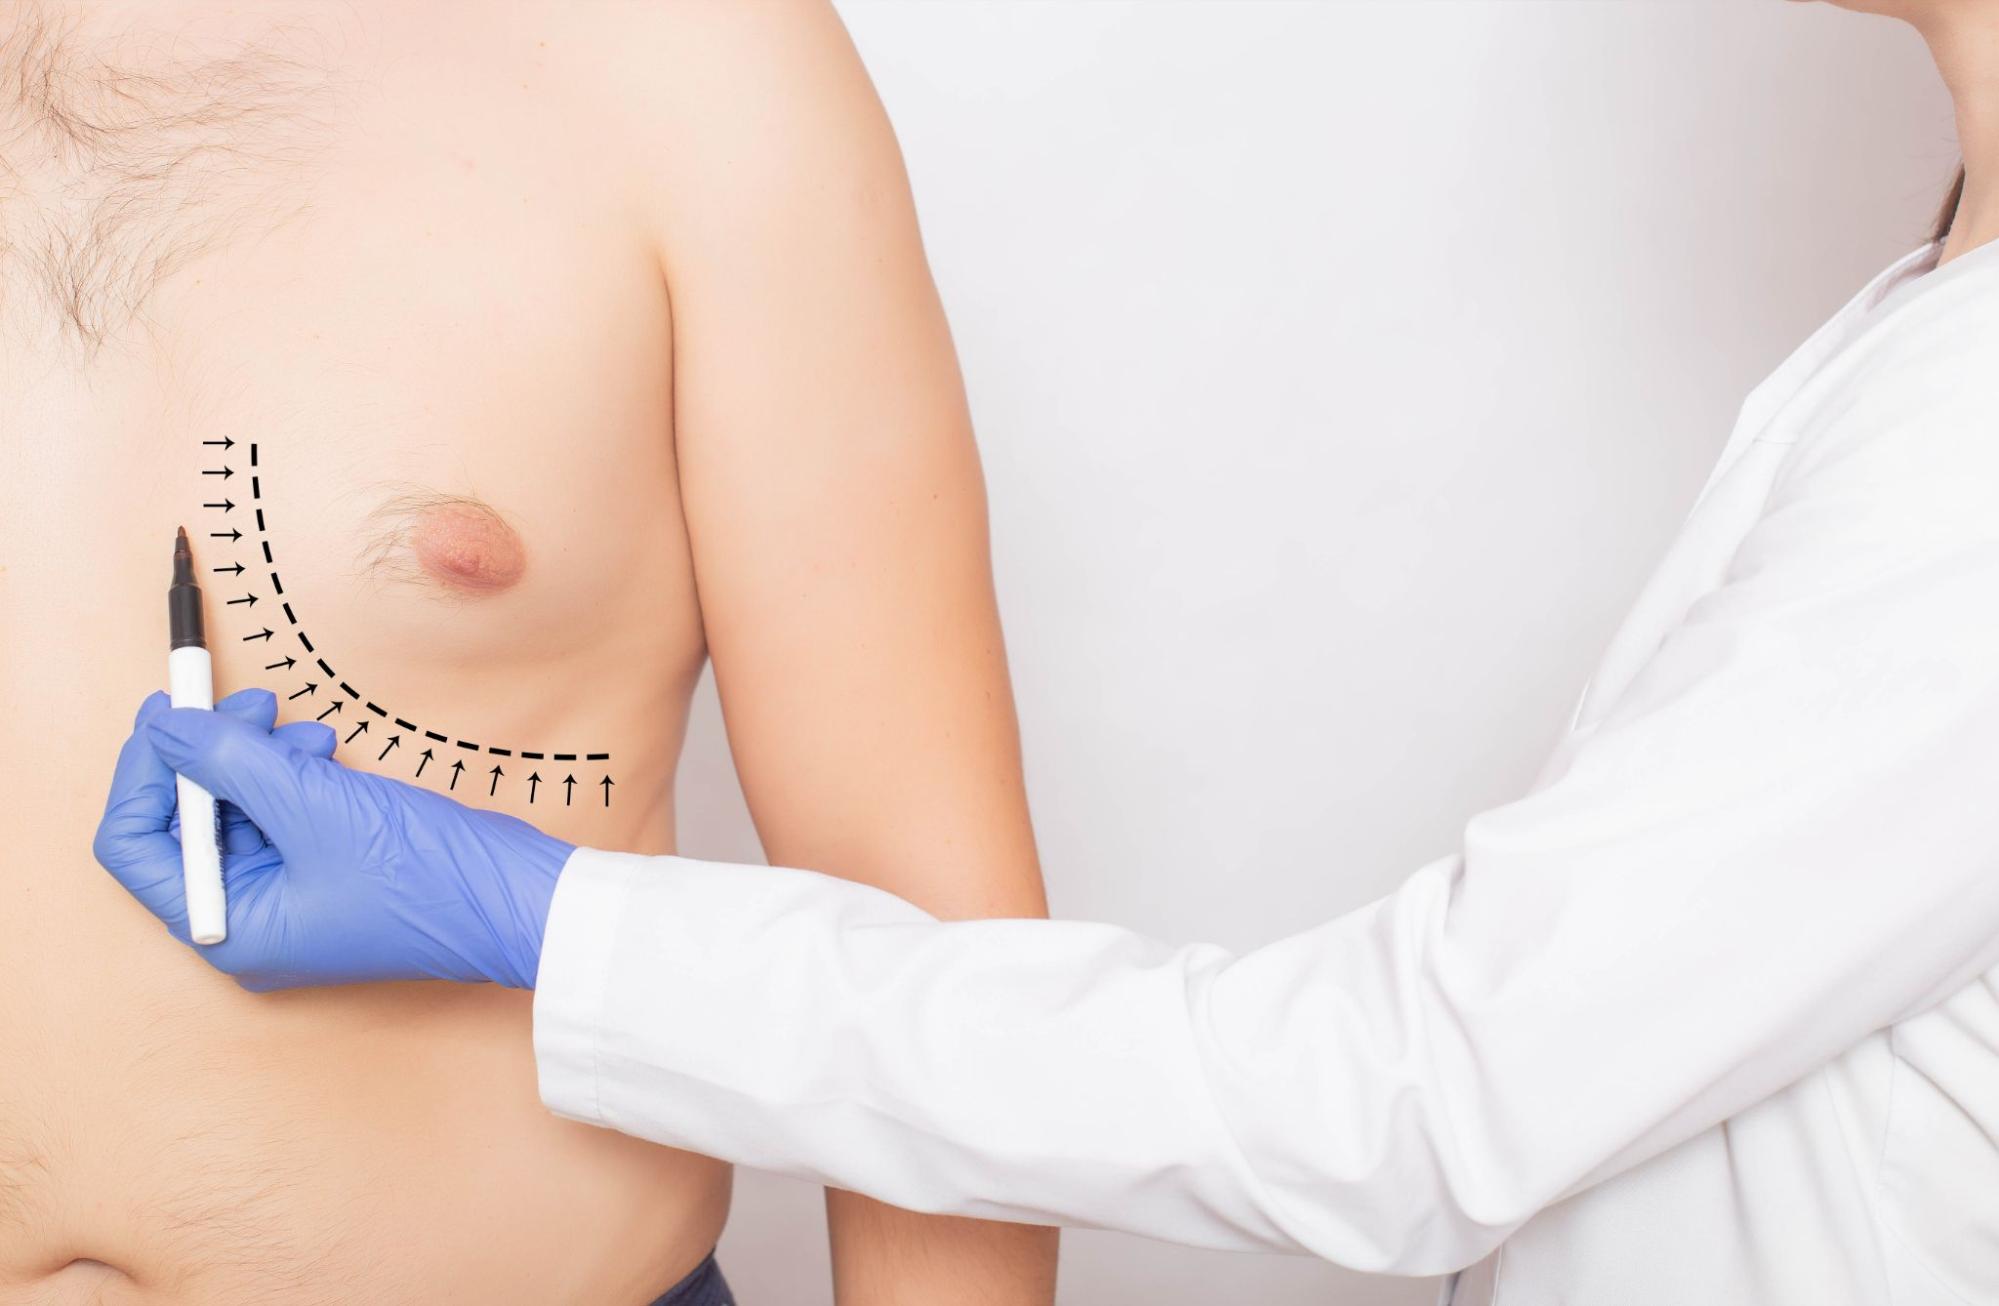 Scar Tissue Formation After Gynecomastia Surgery: Is it Normal?